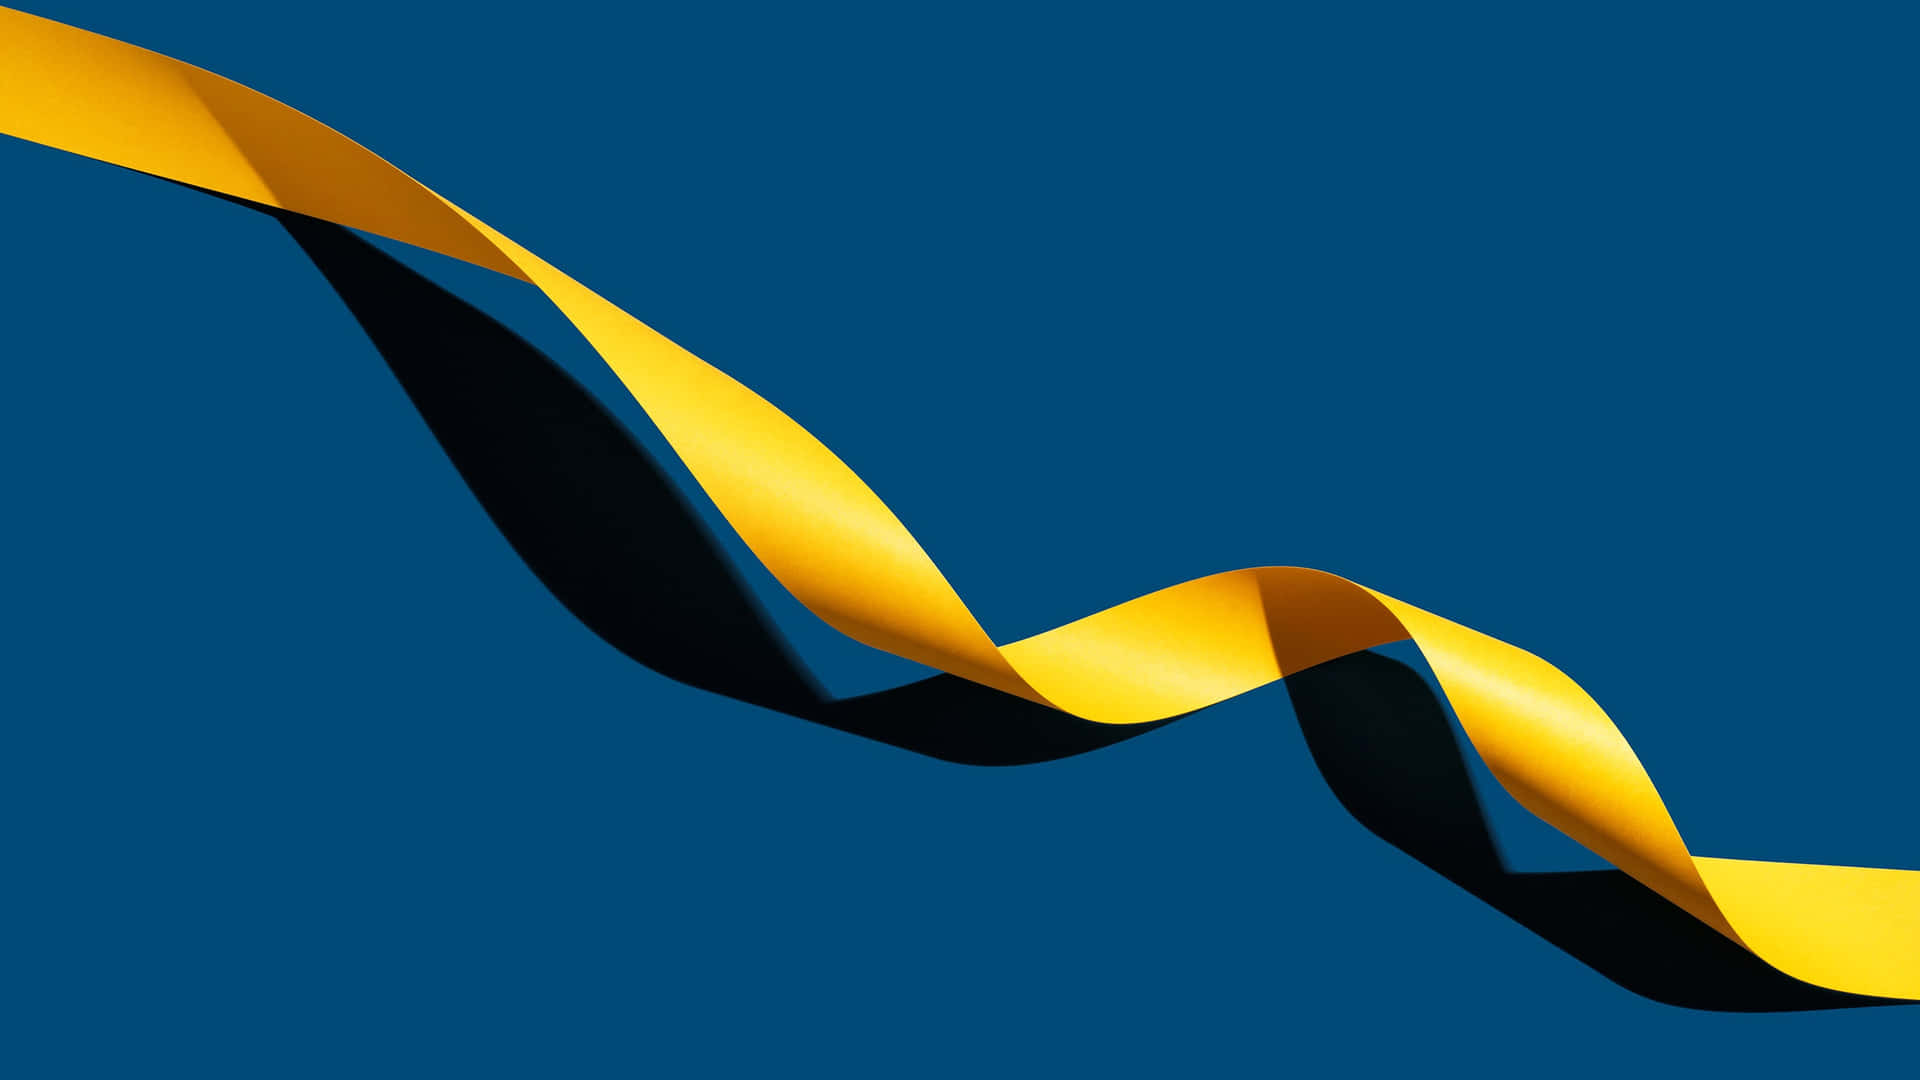 A Yellow And Black Ribbon On A Blue Background